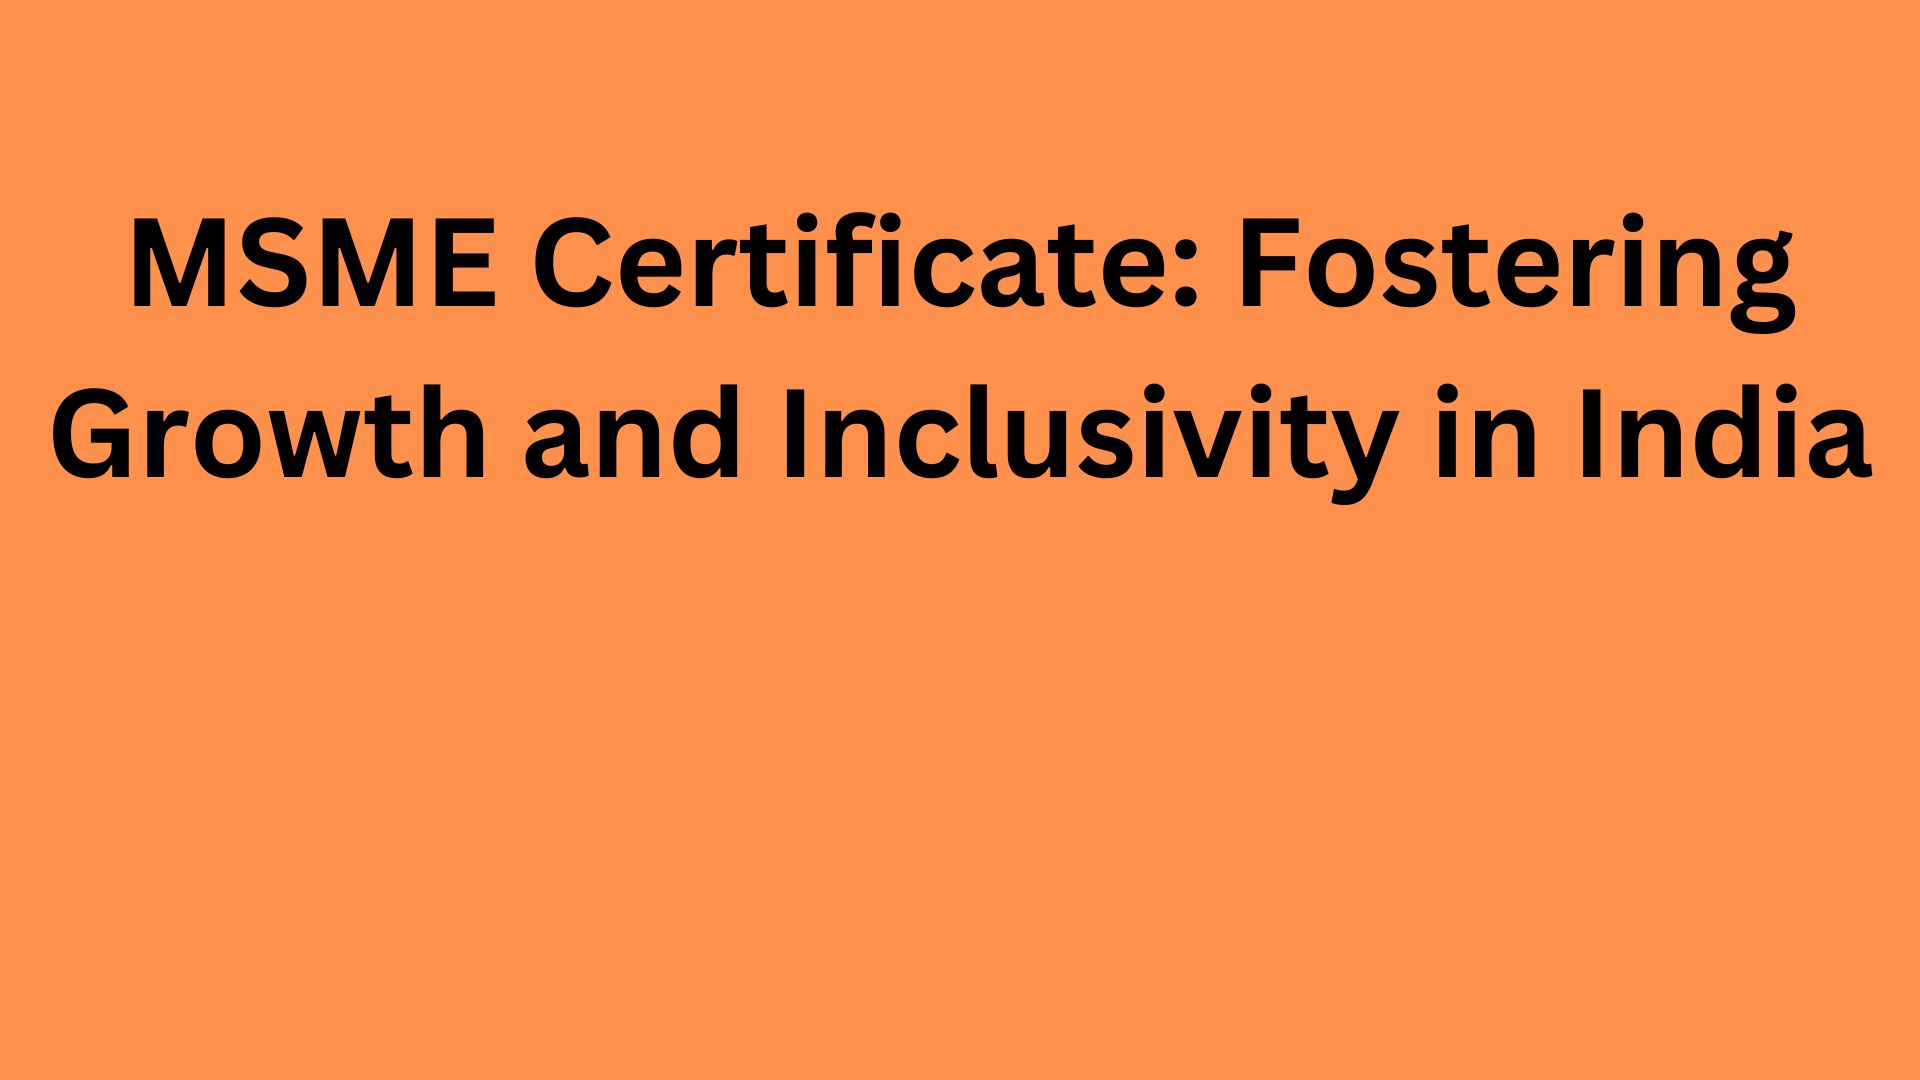 MSME Certificate: Fostering Growth and Inclusivity in India